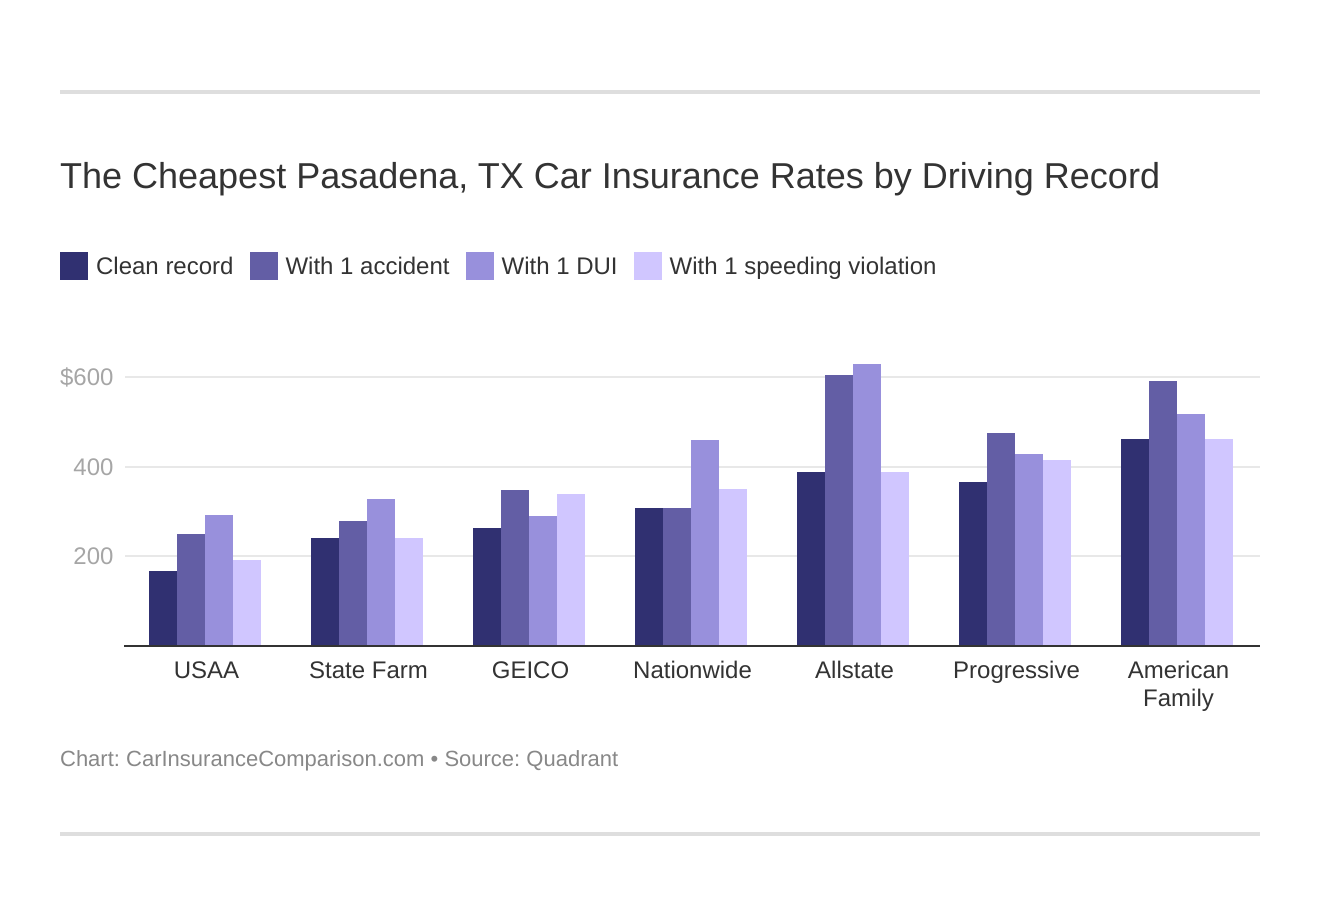 The Cheapest Pasadena, TX Car Insurance Rates by Driving Record